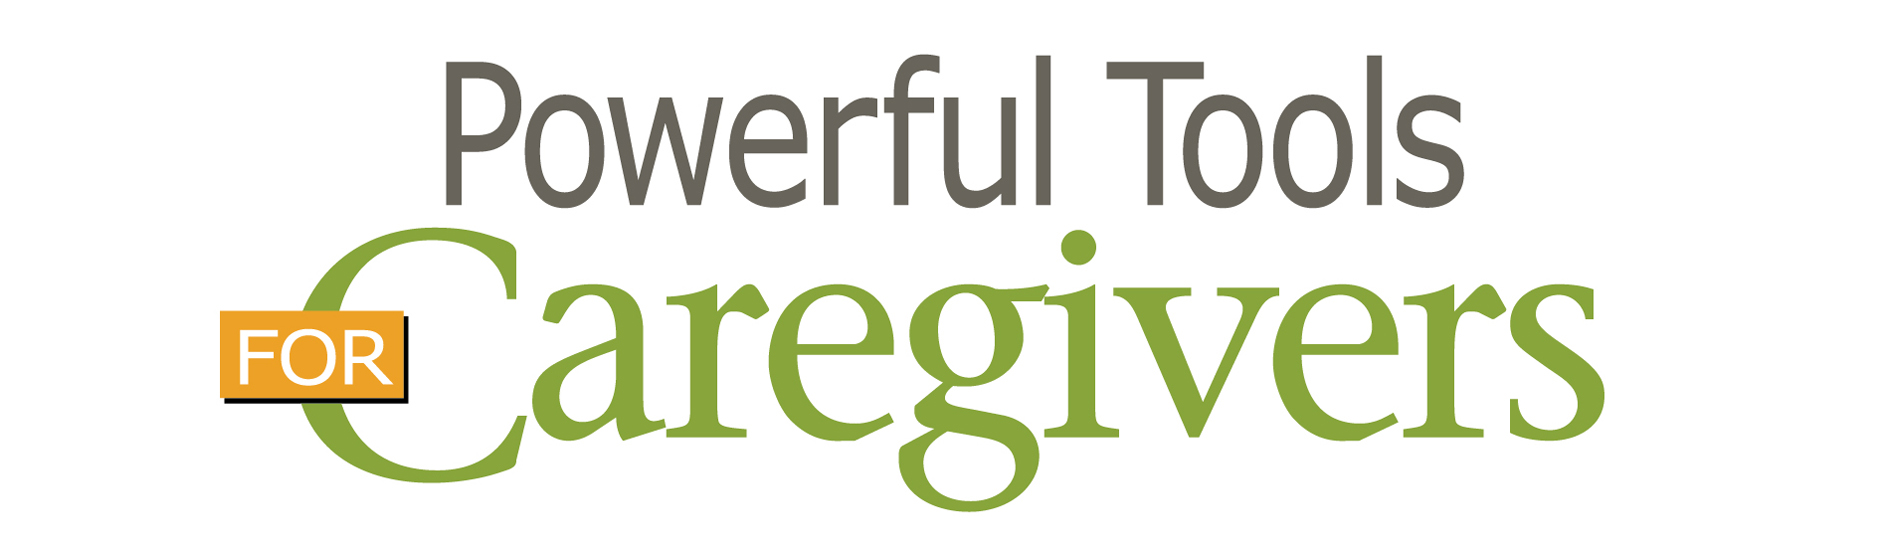 Powerful Tools For Caregivers Logo